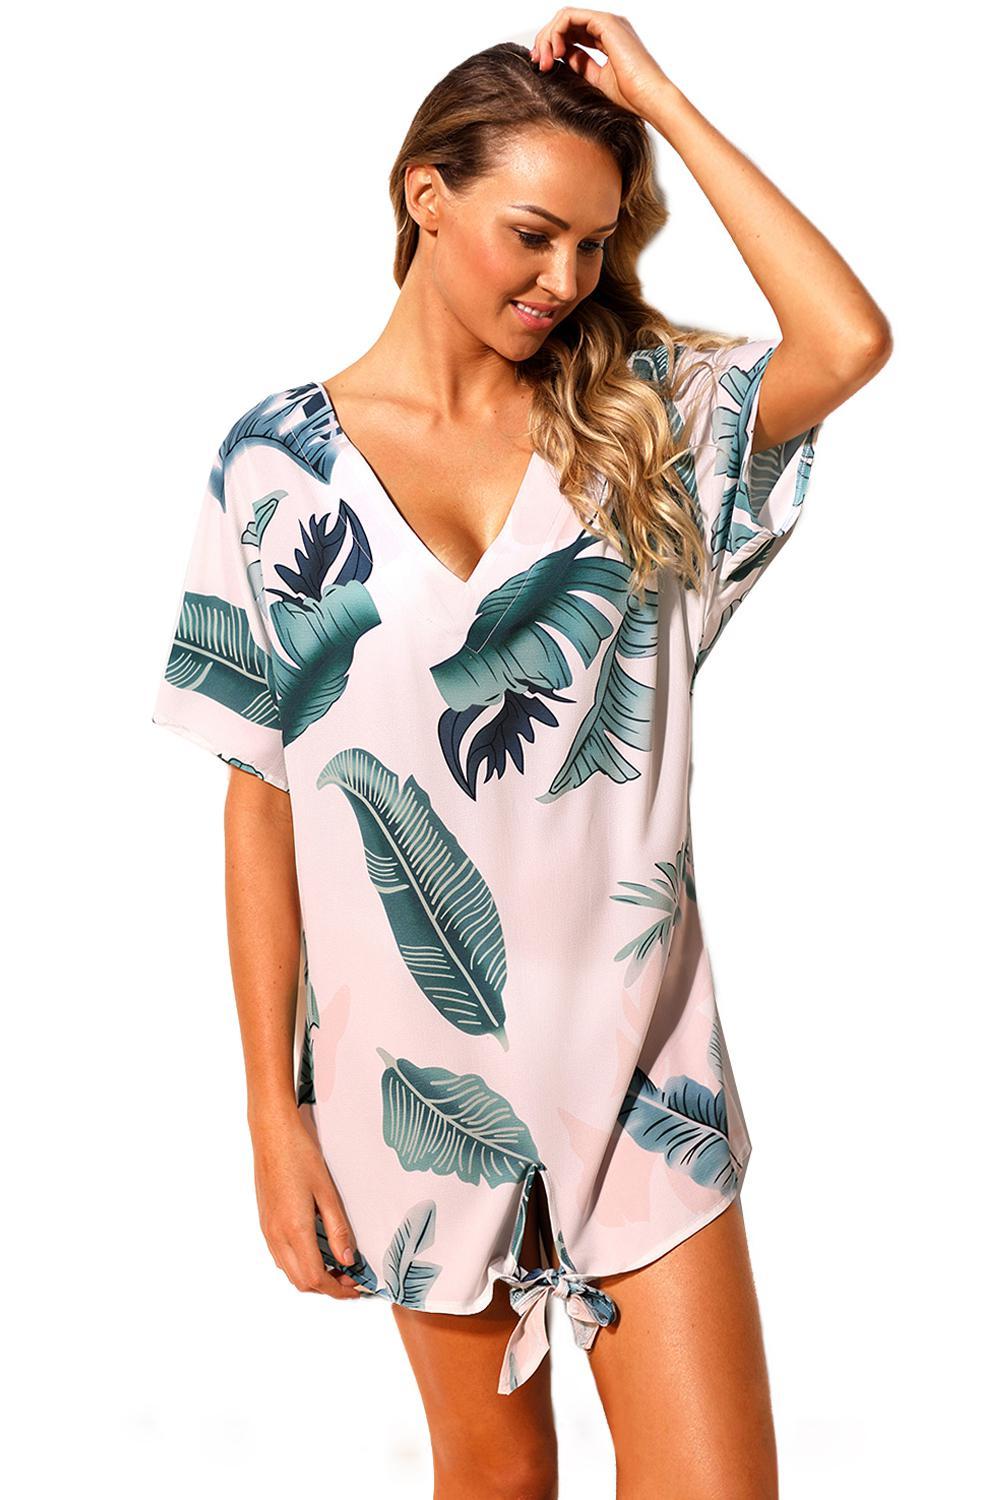 Shoulder Cover Up Dress Up Cover Up Boxy Beach Caftan LC42258-1 LC42259-10 LC42259-109 LC42259-3 Elegant Lace Beach Tie The Knot Palm Leaves Tie The Knot Palmetto Tie The Knot Red Floral Cover Up